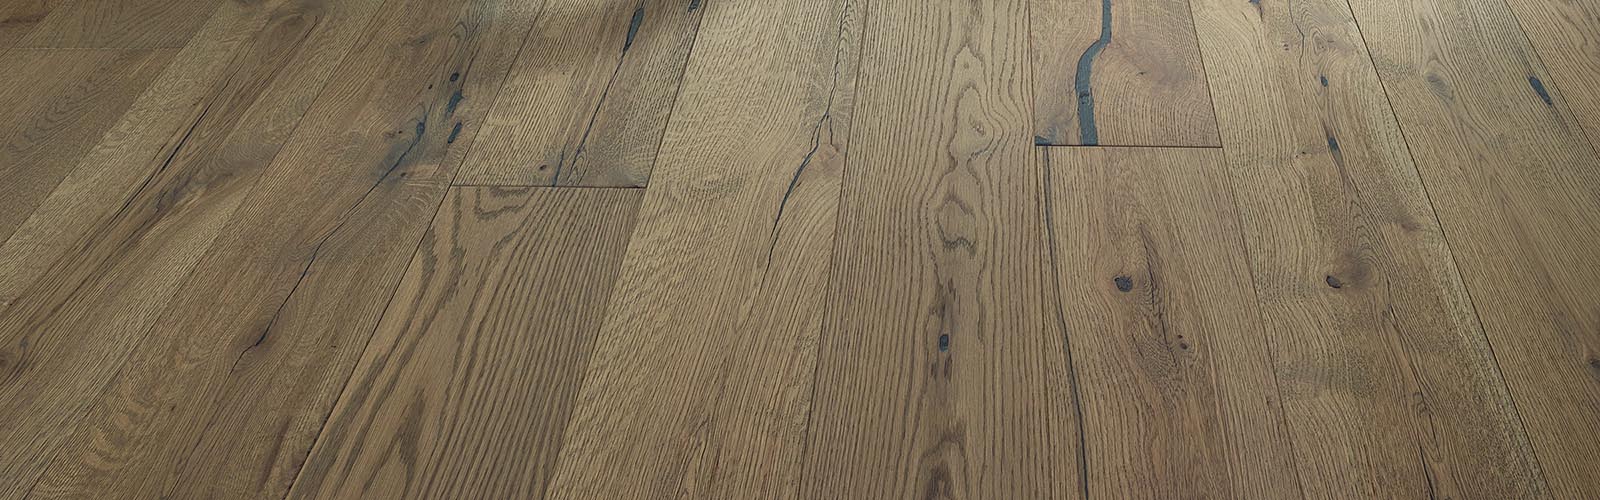 The Difference Between Engineered and Solid Hardwood Flooring